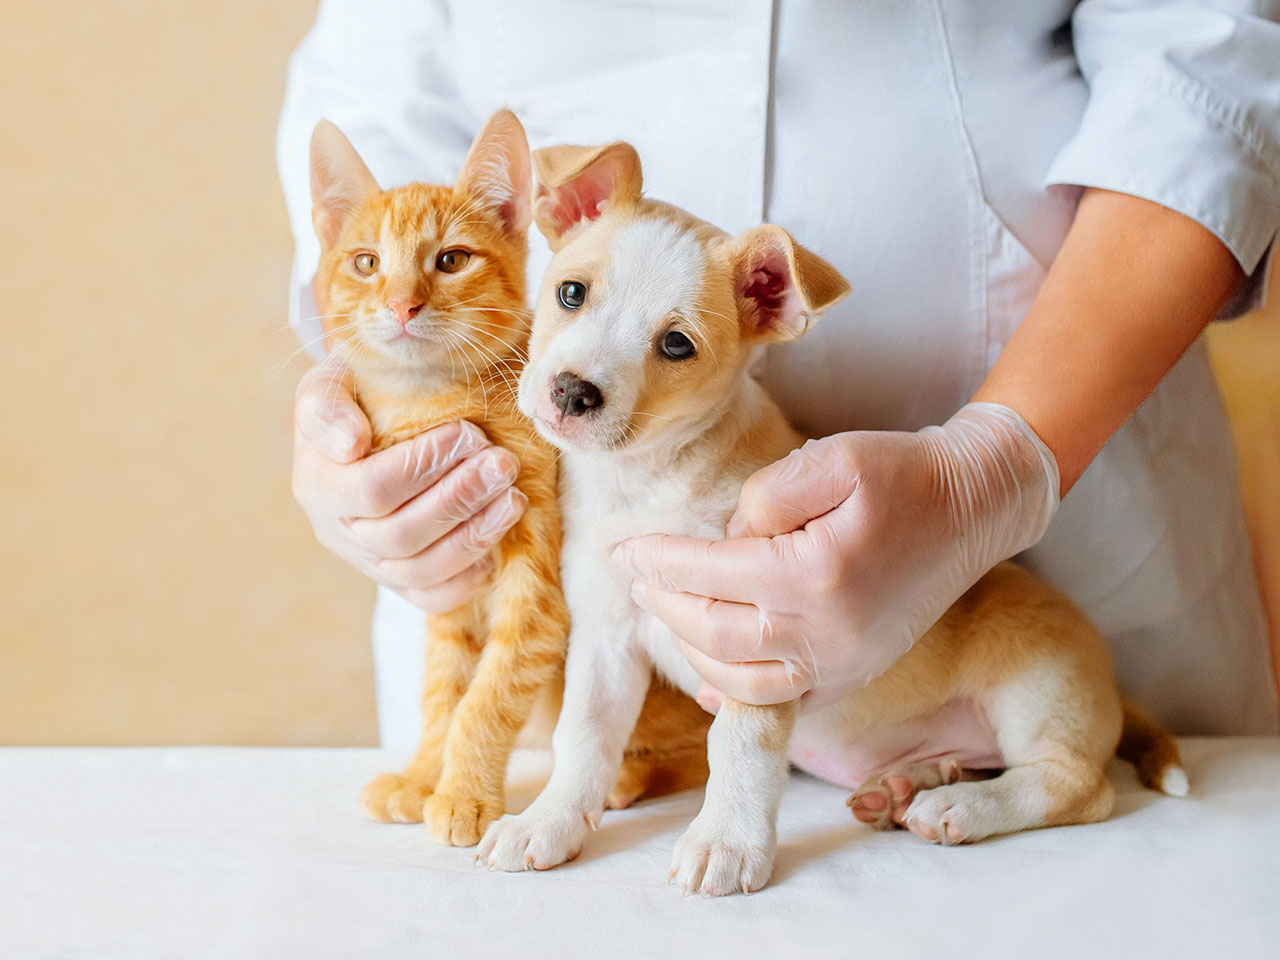 Care of Pets with Best Products